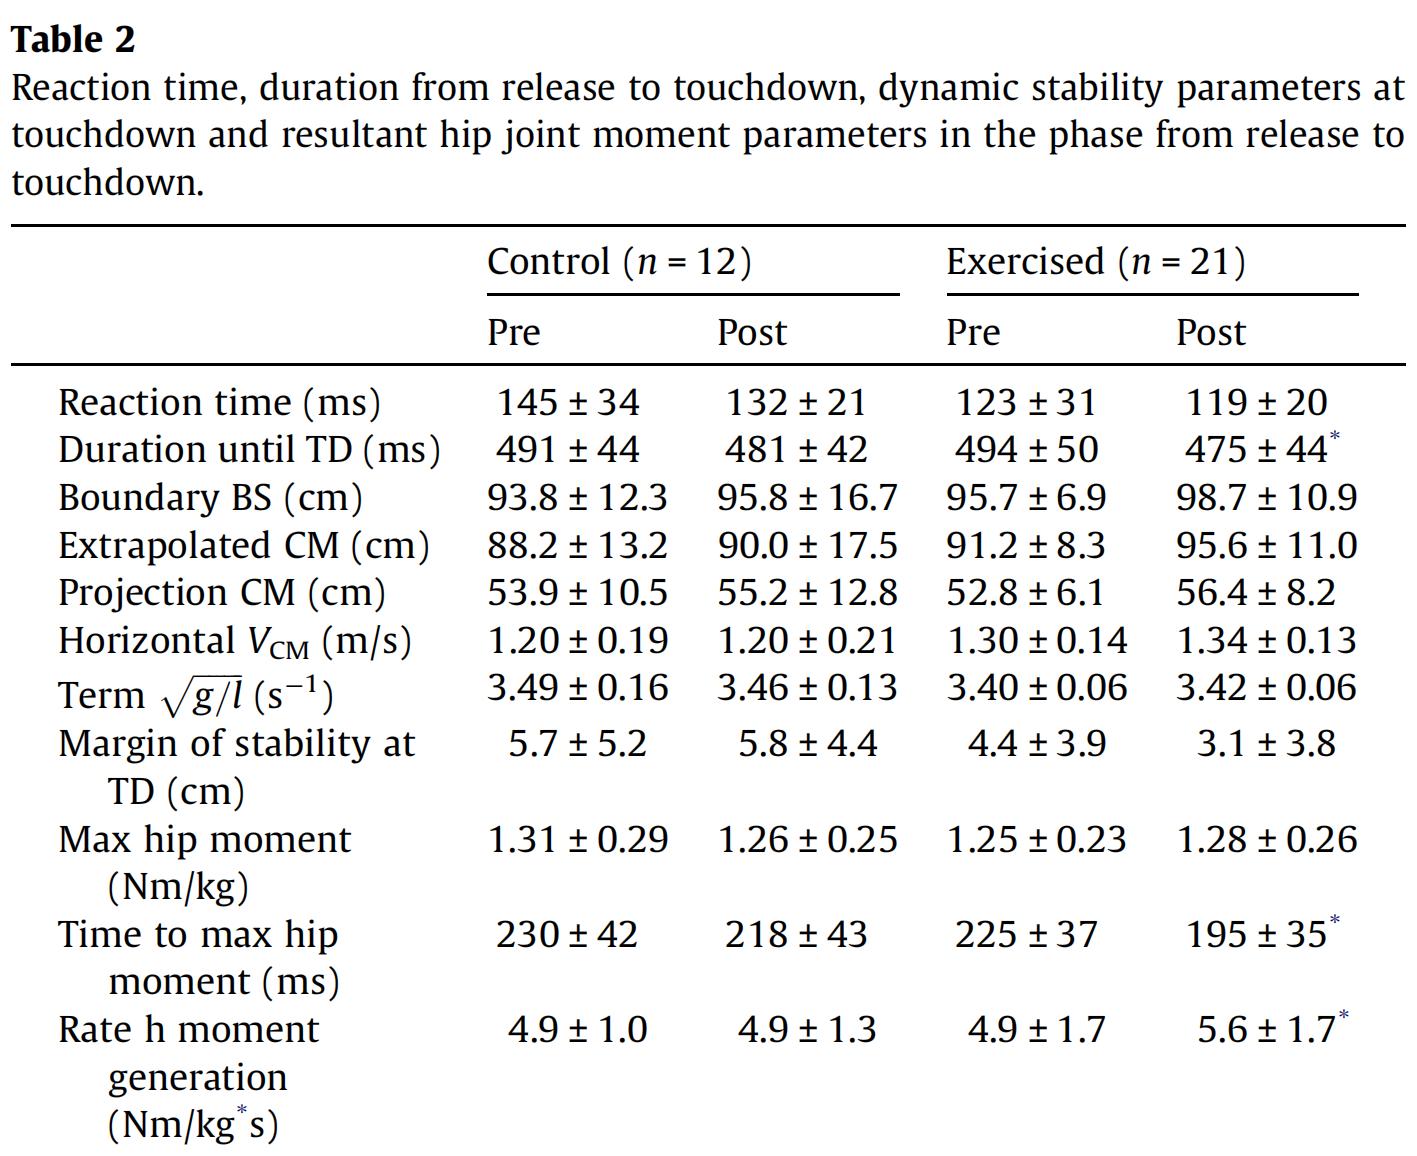 a table showing the reaction time, duration-from-release-to-touchdown